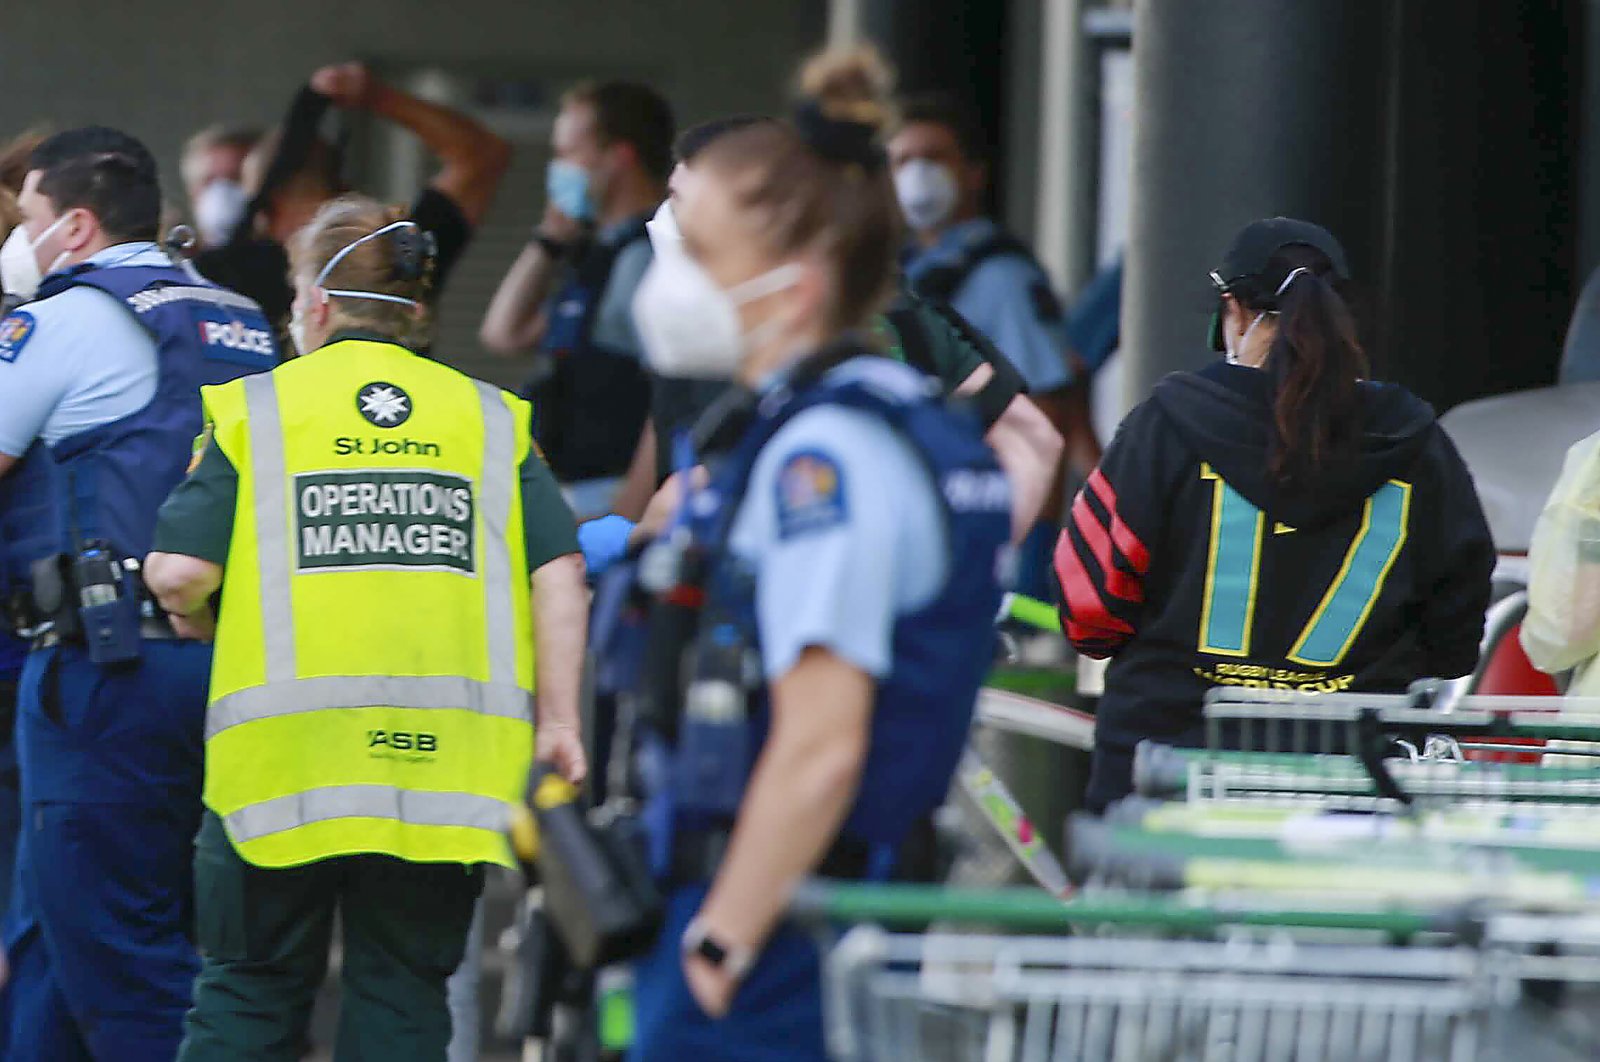 Police and ambulance staff attend a scene outside an Auckland supermarket, New Zealand, Sep. 3, 2021. (AP Photo)